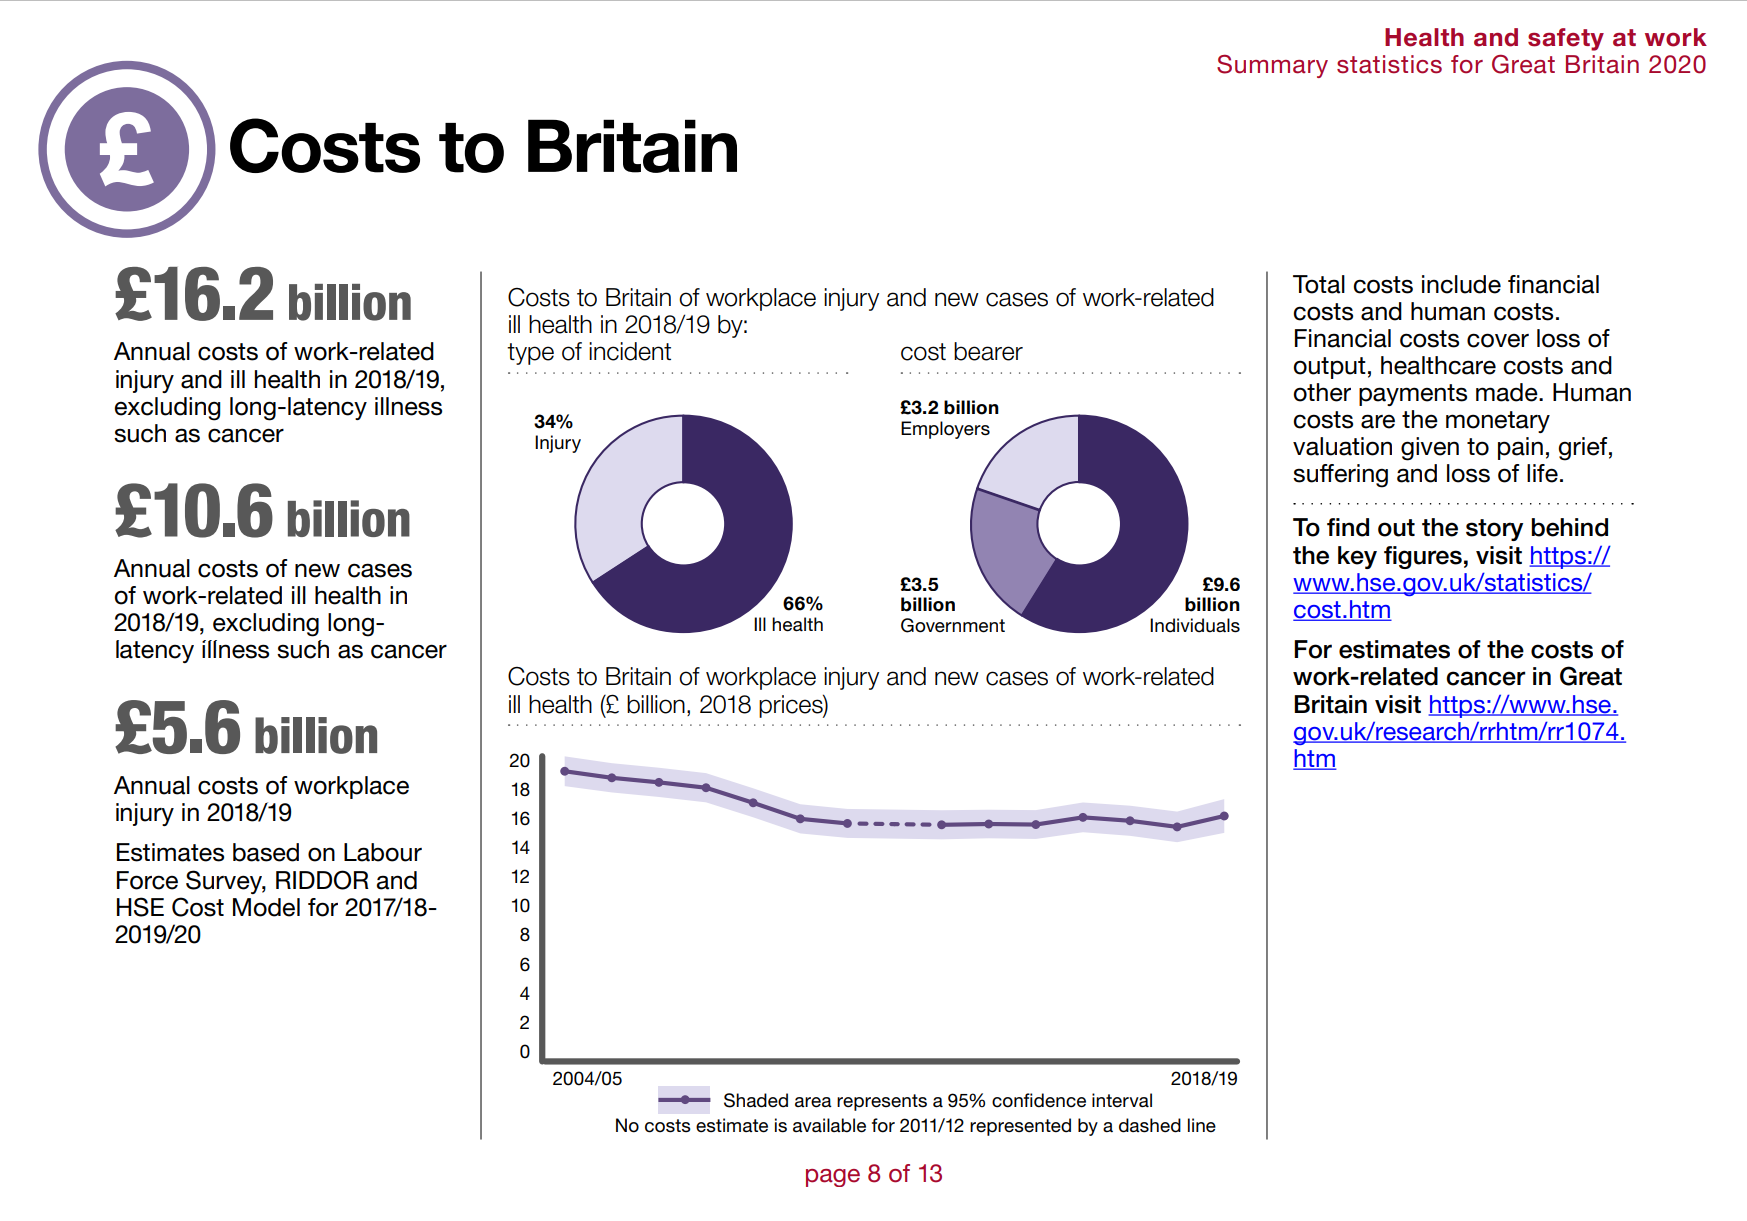 Health and safety at work stats 2020: Costs to Britain